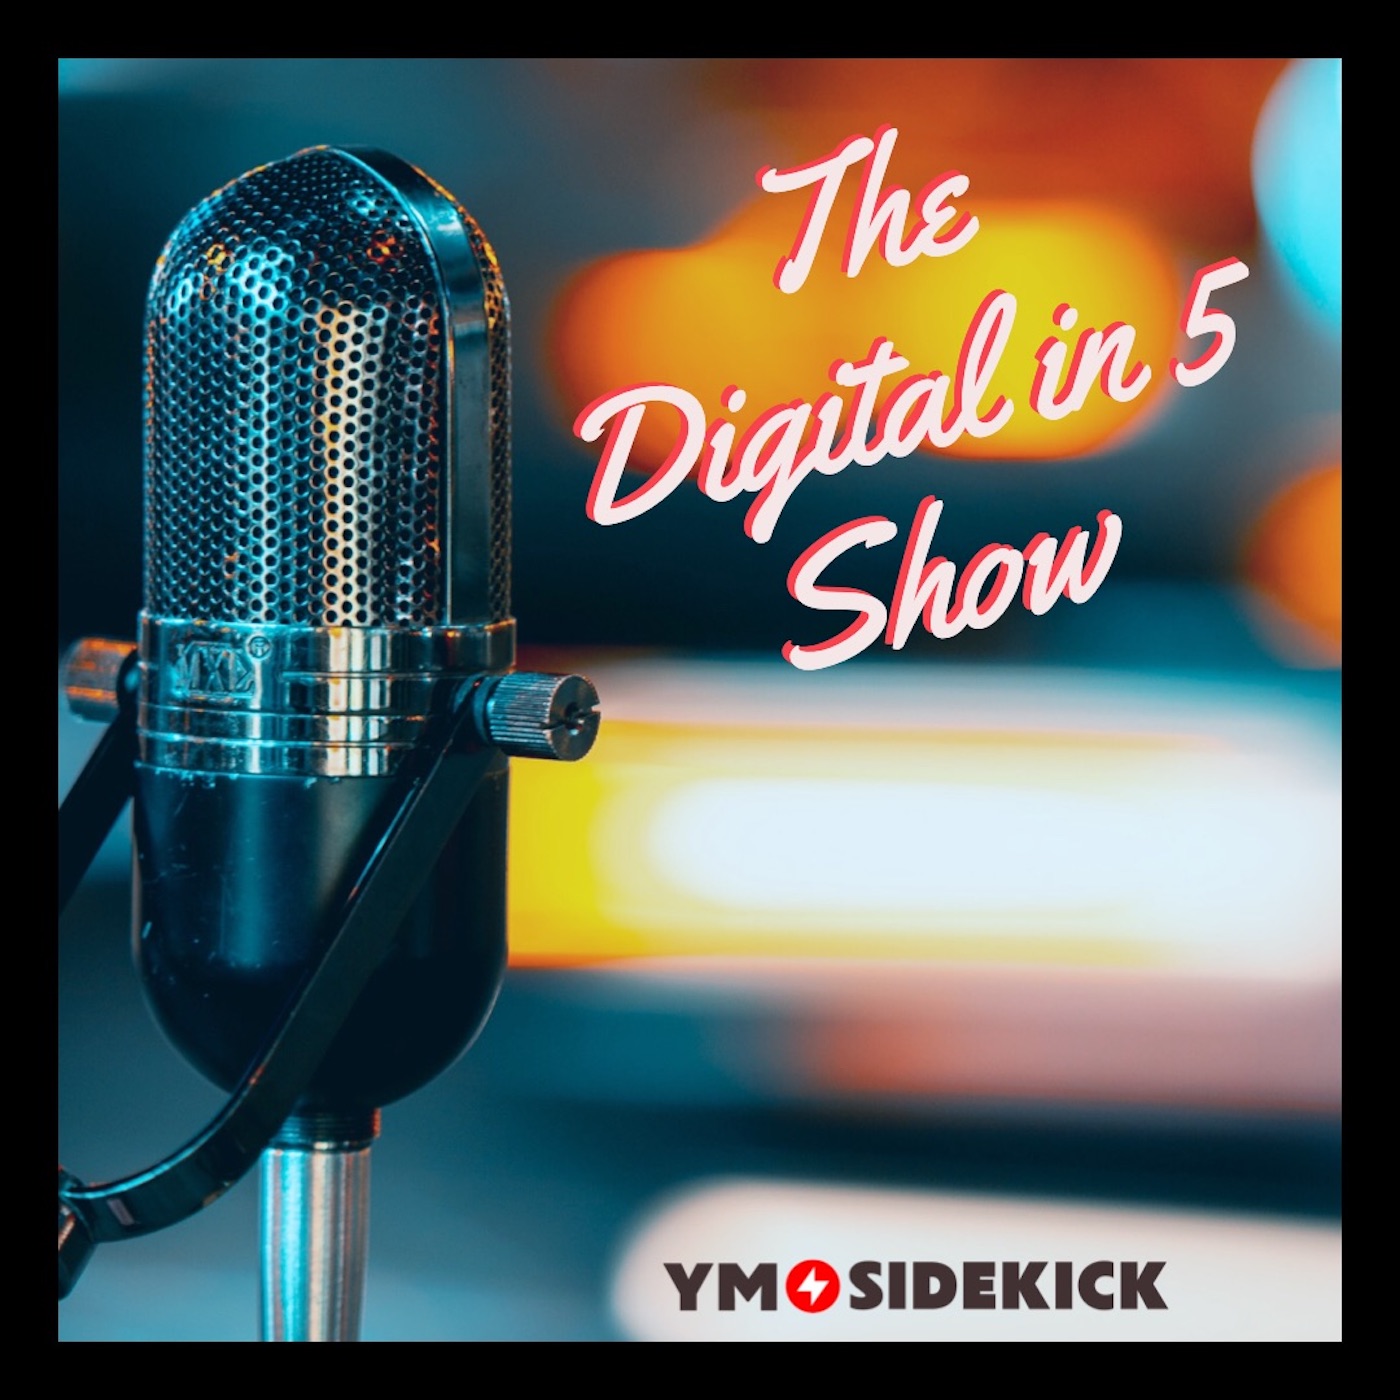 The Digital in 5 Show